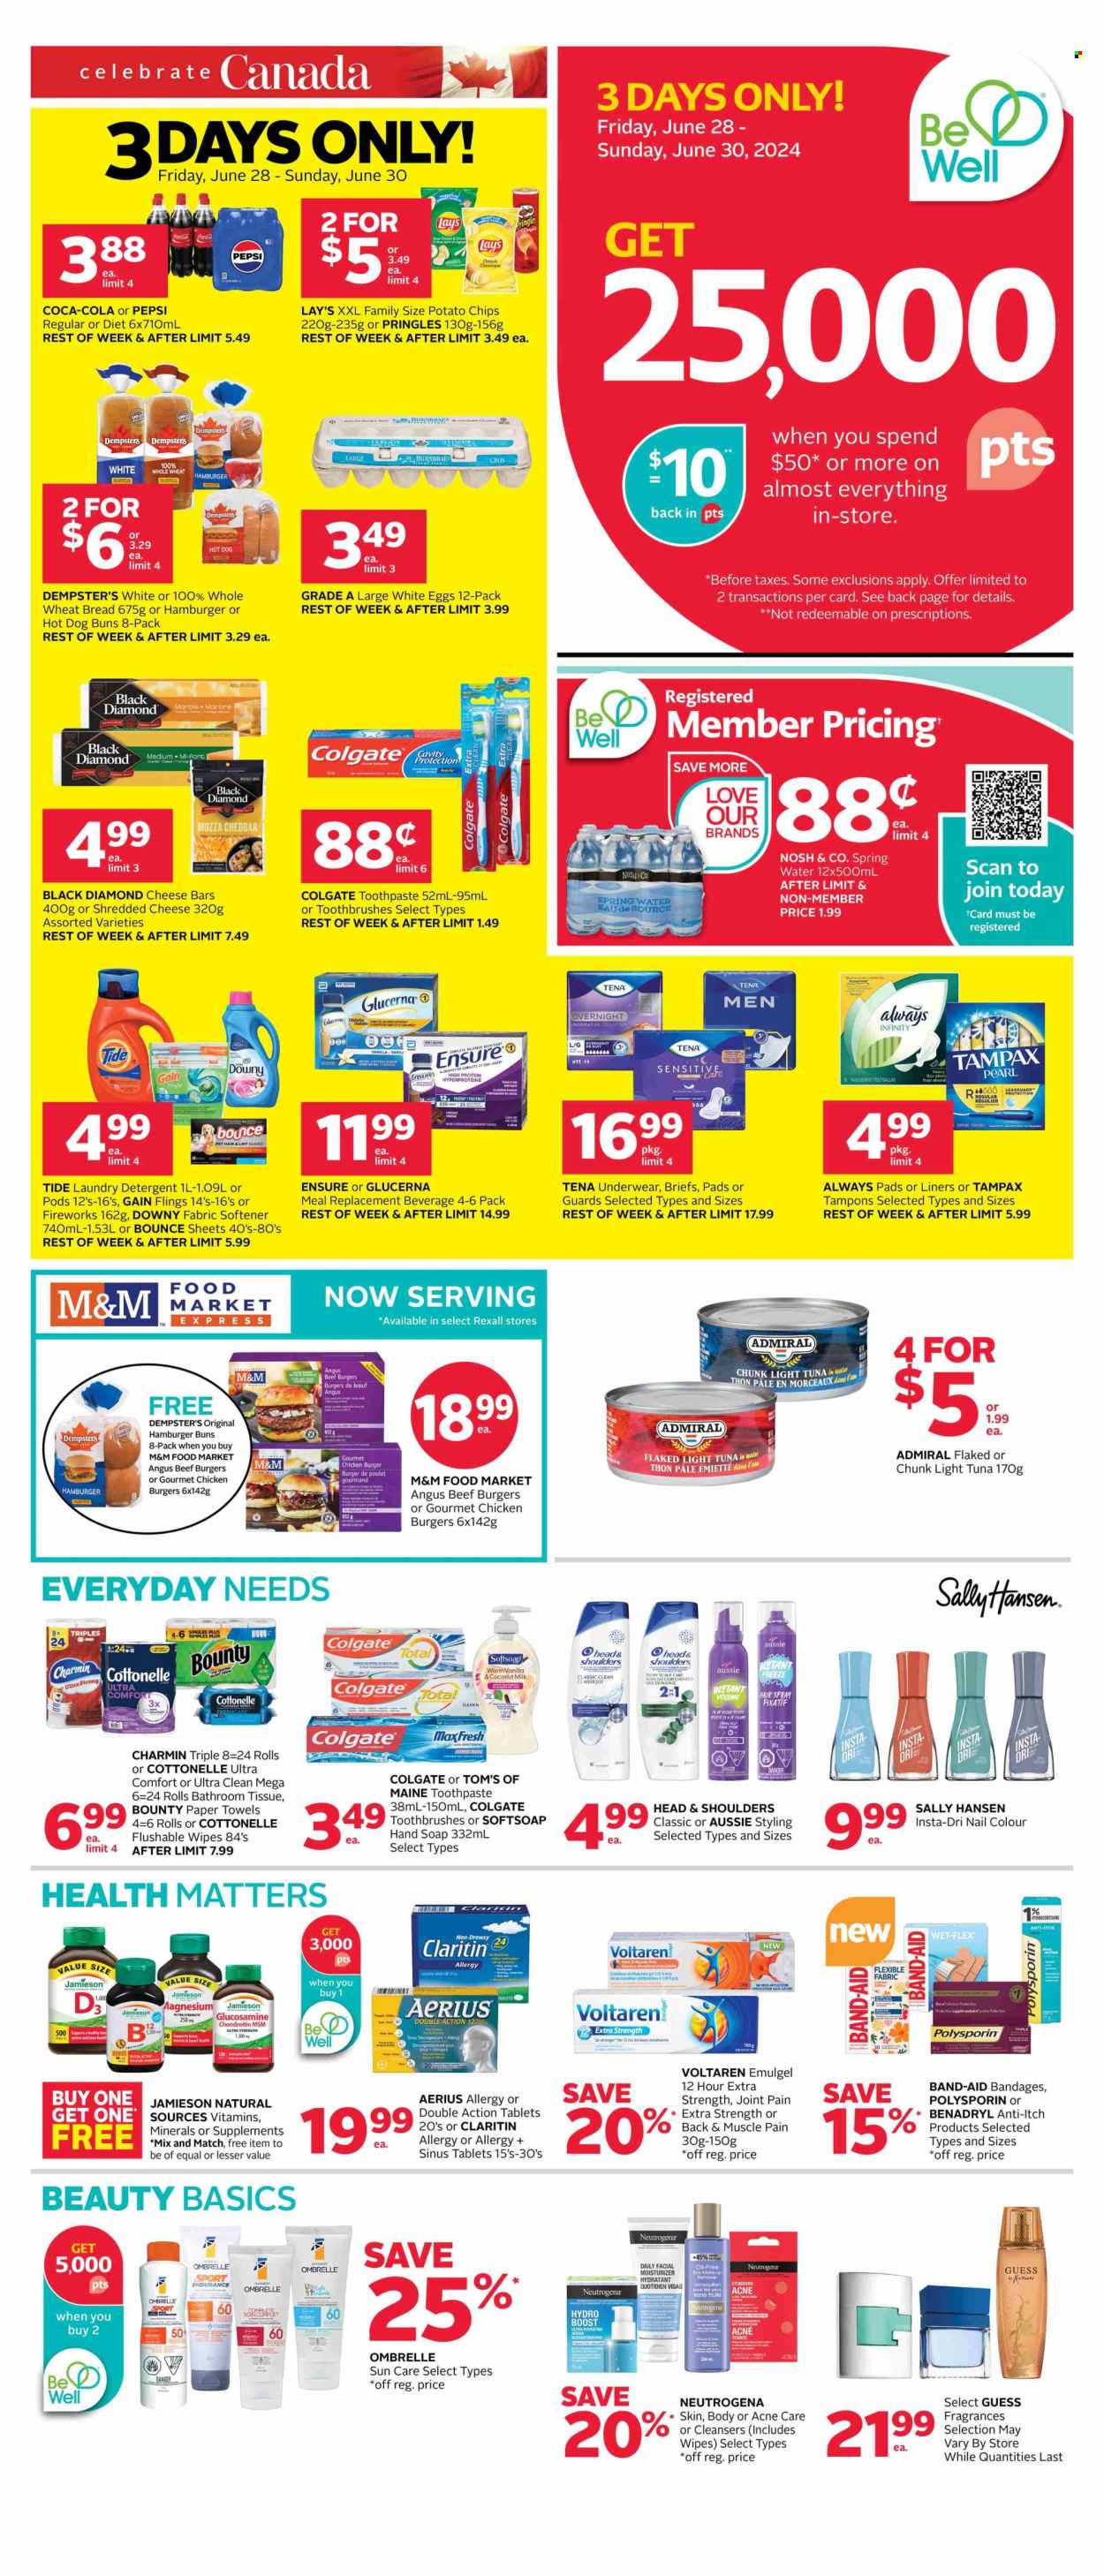 thumbnail - Rexall Flyer - June 28, 2024 - July 04, 2024 - Sales products - bread, wheat bread, hot dog rolls, burger buns, shredded cheese, cheese, eggs, large eggs, Bounty, M&M's, potato chips, Pringles, chips, Lay’s, salty snack, canned tuna, coconut milk, tuna, tuna in water, light tuna, canned fish, Coca-Cola, Pepsi, soft drink, spring water, carbonated soft drink, wipes, ointment, bath tissue, Cottonelle, kitchen towels, paper towels, Charmin, pads, detergent, Gain, Tide, fabric softener, laundry detergent, Bounce, dryer sheets, Downy Laundry, Softsoap, hand soap, Tom's of Maine, toothbrush, toothpaste, Always pads, sanitary pads, tampons, Always Infinity, cleanser, moisturizer, sun care, acne care, Aussie, Head & Shoulders, hair styling product, fragrance, Guess, nail enamel, glucosamine, magnesium, Glucerna, nutritional supplement, dietary supplement, Voltaren, Benadryl, Claritin, allergy control, pain therapy, vitamins, polysporin, plaster, incontinence care, band-aid, Colgate, Neutrogena, Sally Hansen, Tampax. Page 1.